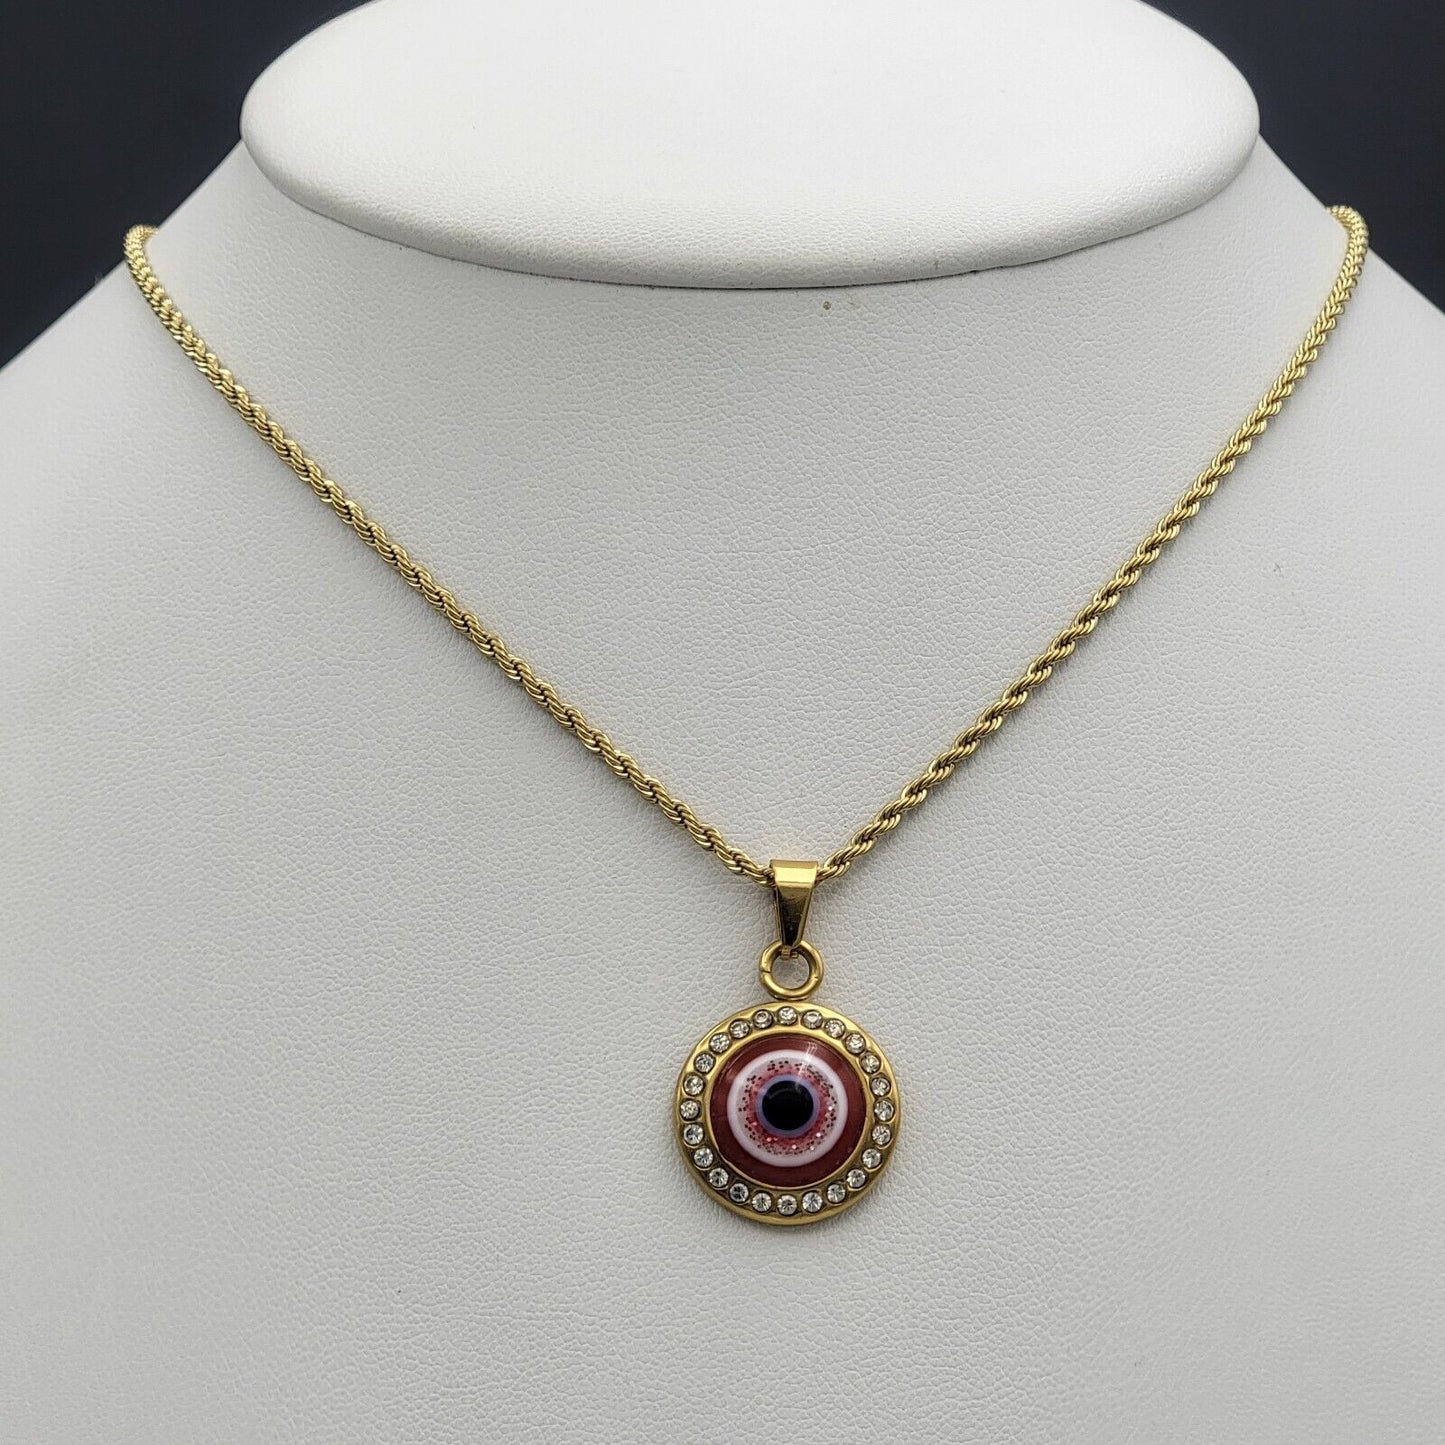 Necklaces - Stainless Steel Gold Plated. Red Eye Pendant Pendant & Chain.